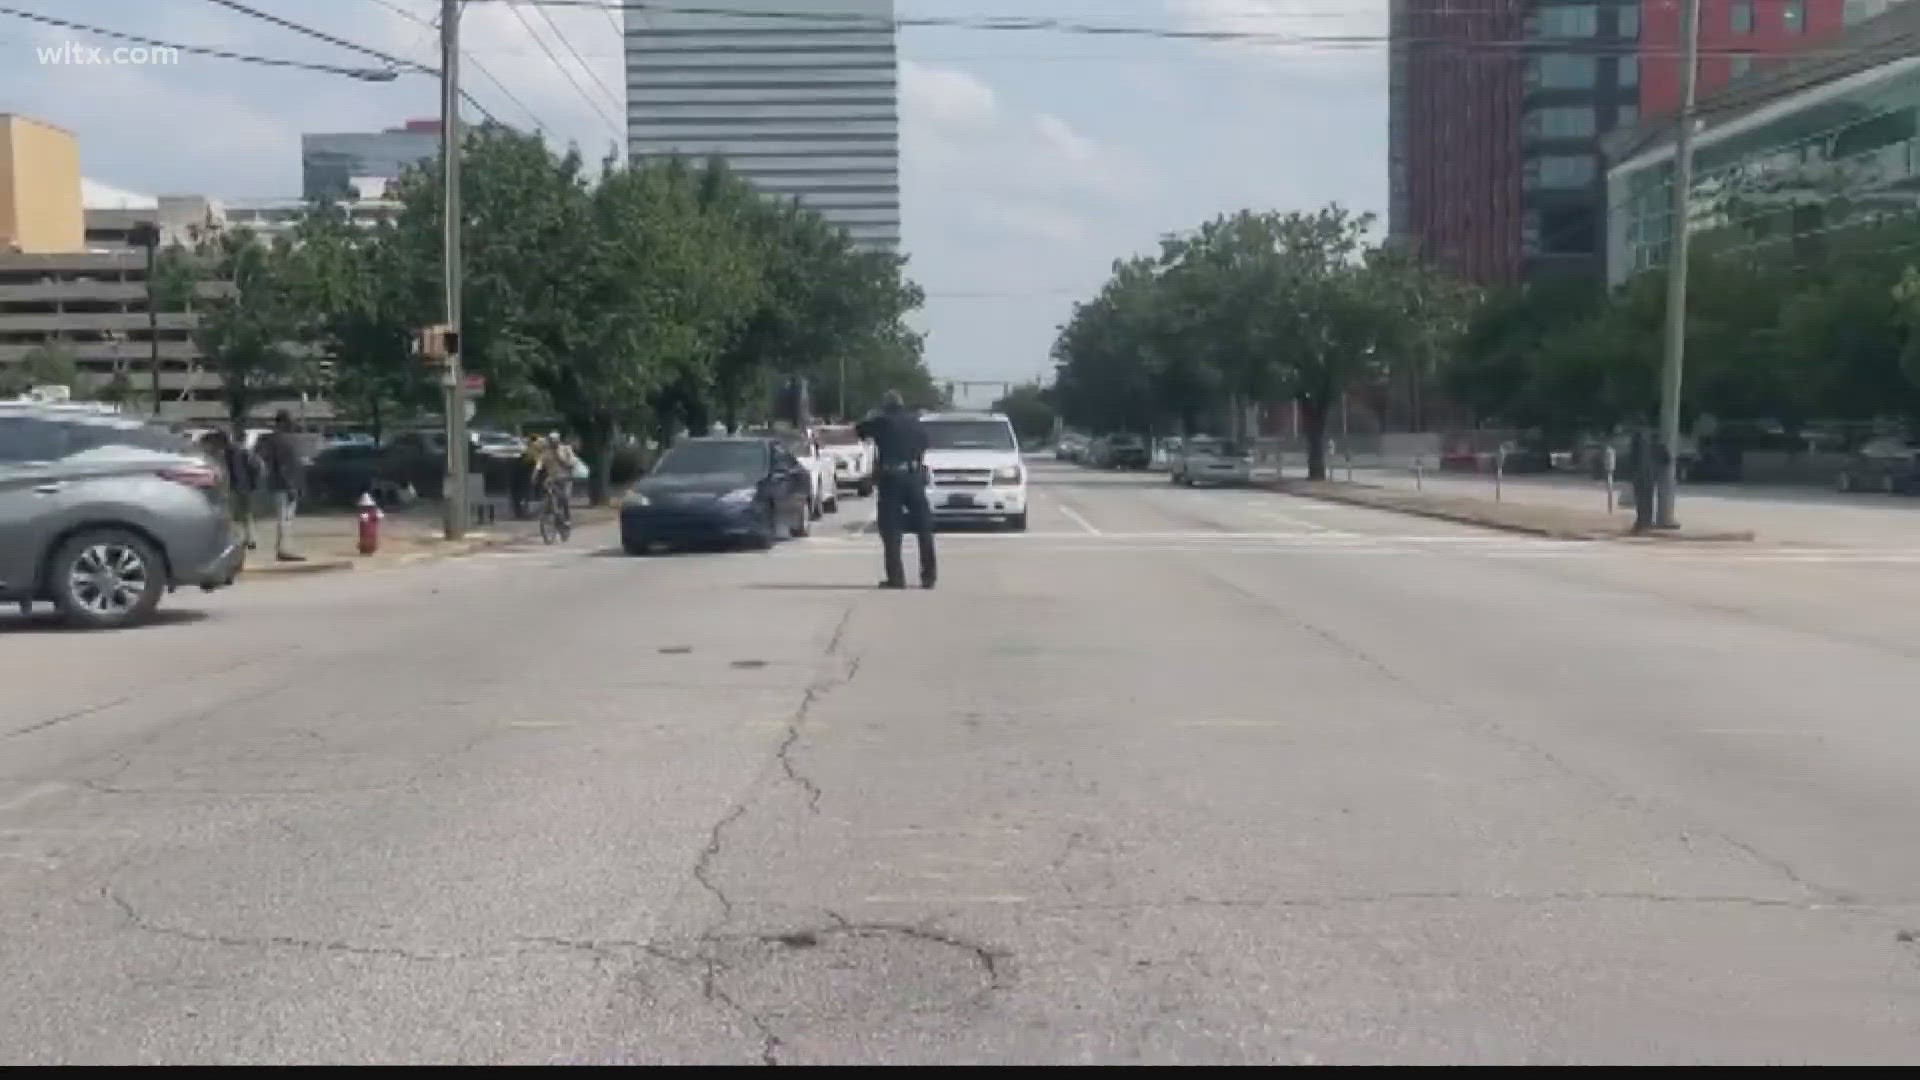 No word on what caused the shooting at Hampton and Assembly, drivers are asked to avoid the area